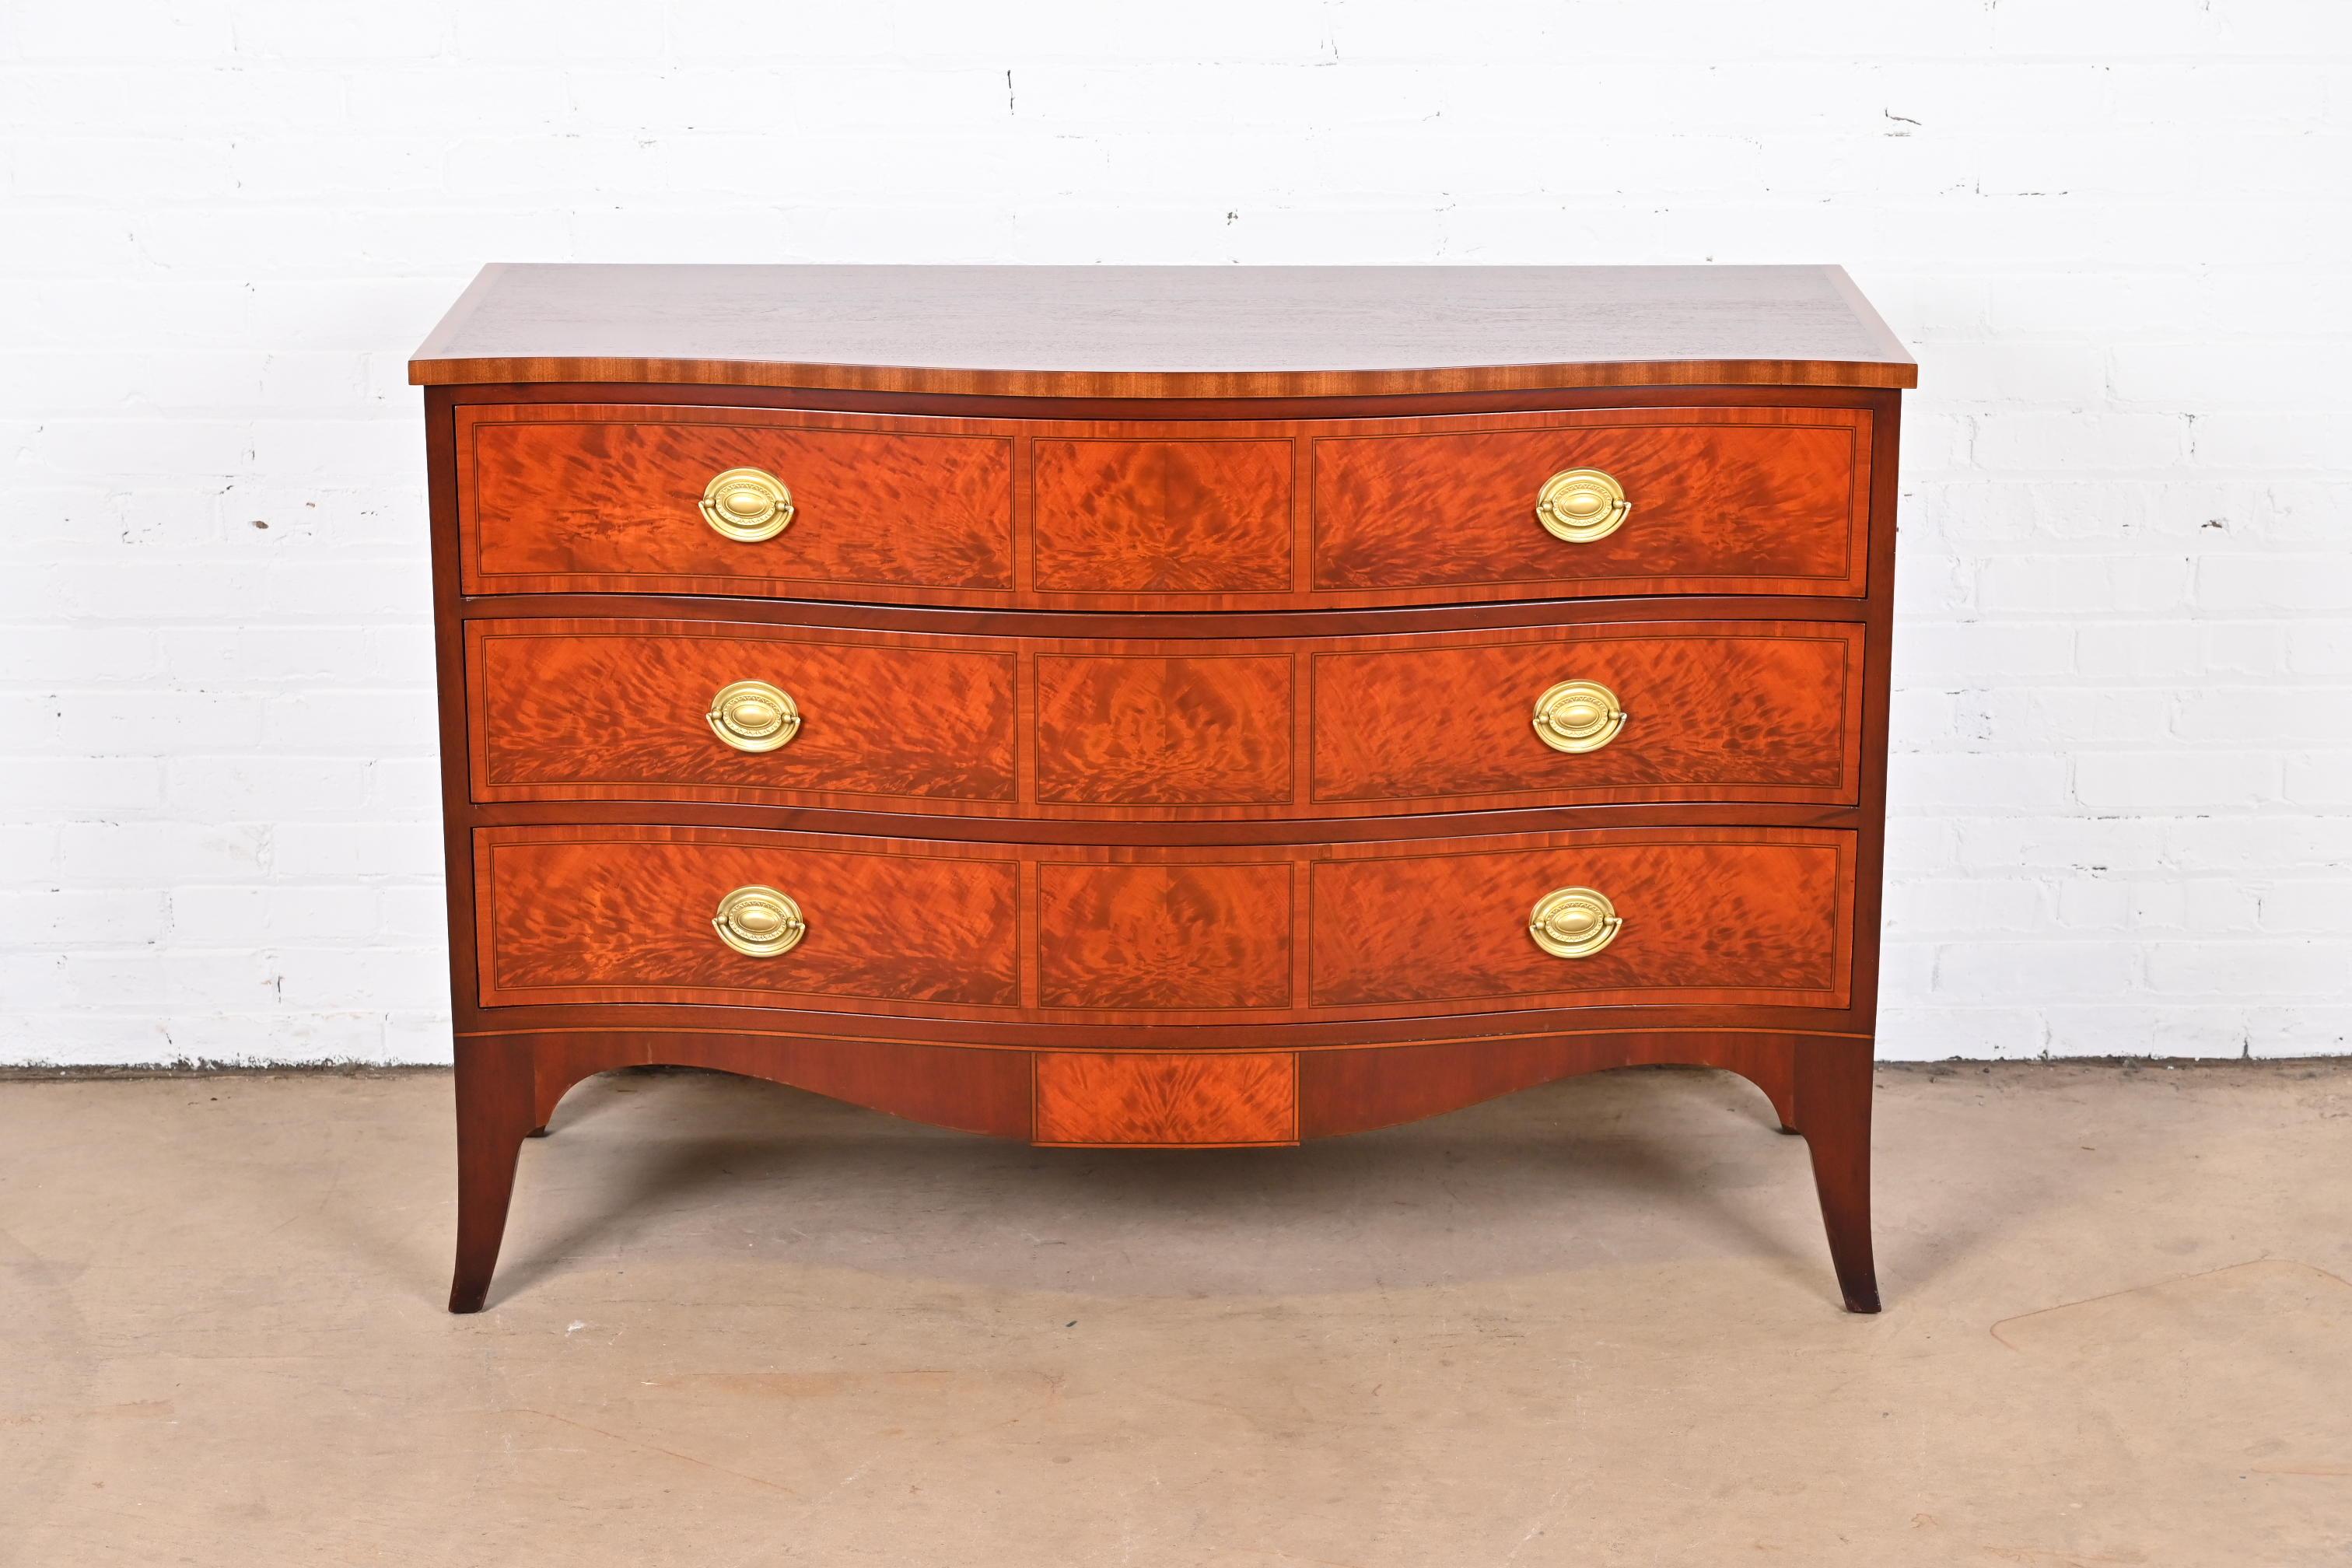 An exceptional Georgian style serpentine front commode or chest of drawers.

Designed by Ralph Widdicomb for John Widdicomb Co.

USA, Circa 1940s

Stunning book-matched flame mahogany, with satinwood inlay and original brass